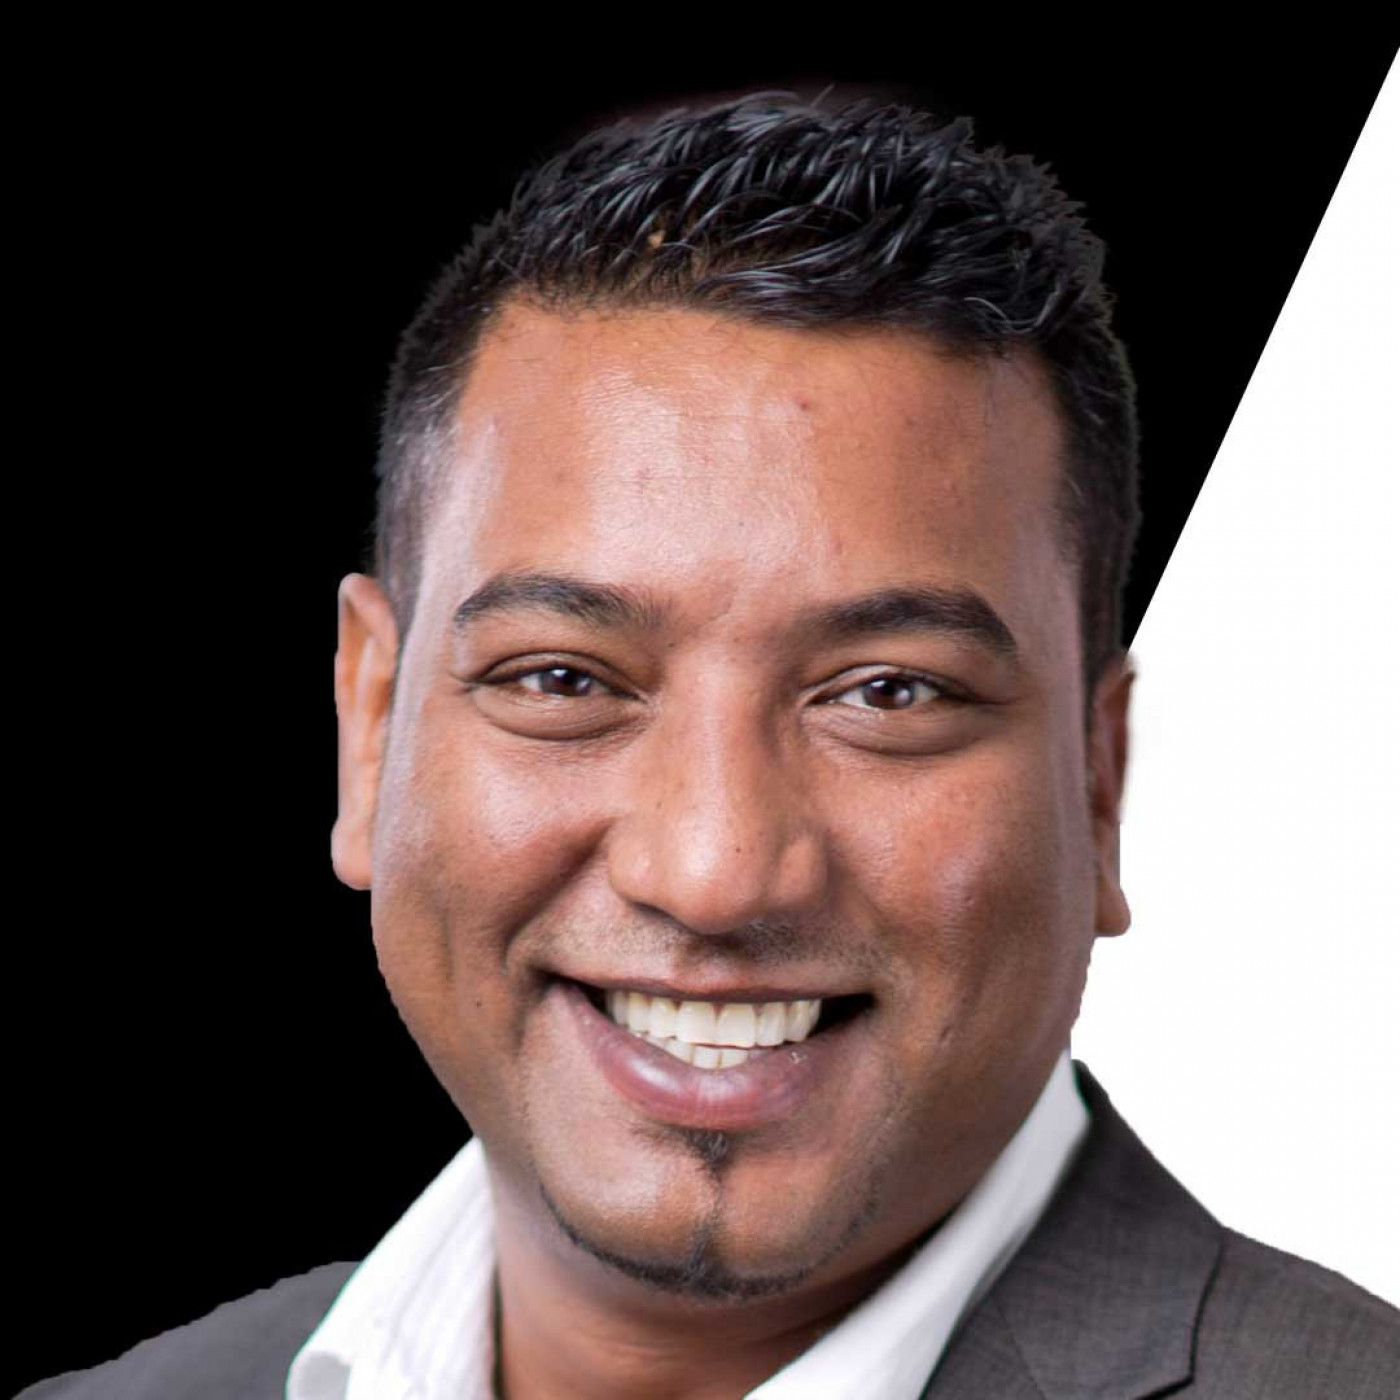 TCS | Yugen Naidoo on Lenovo and the future of the PC